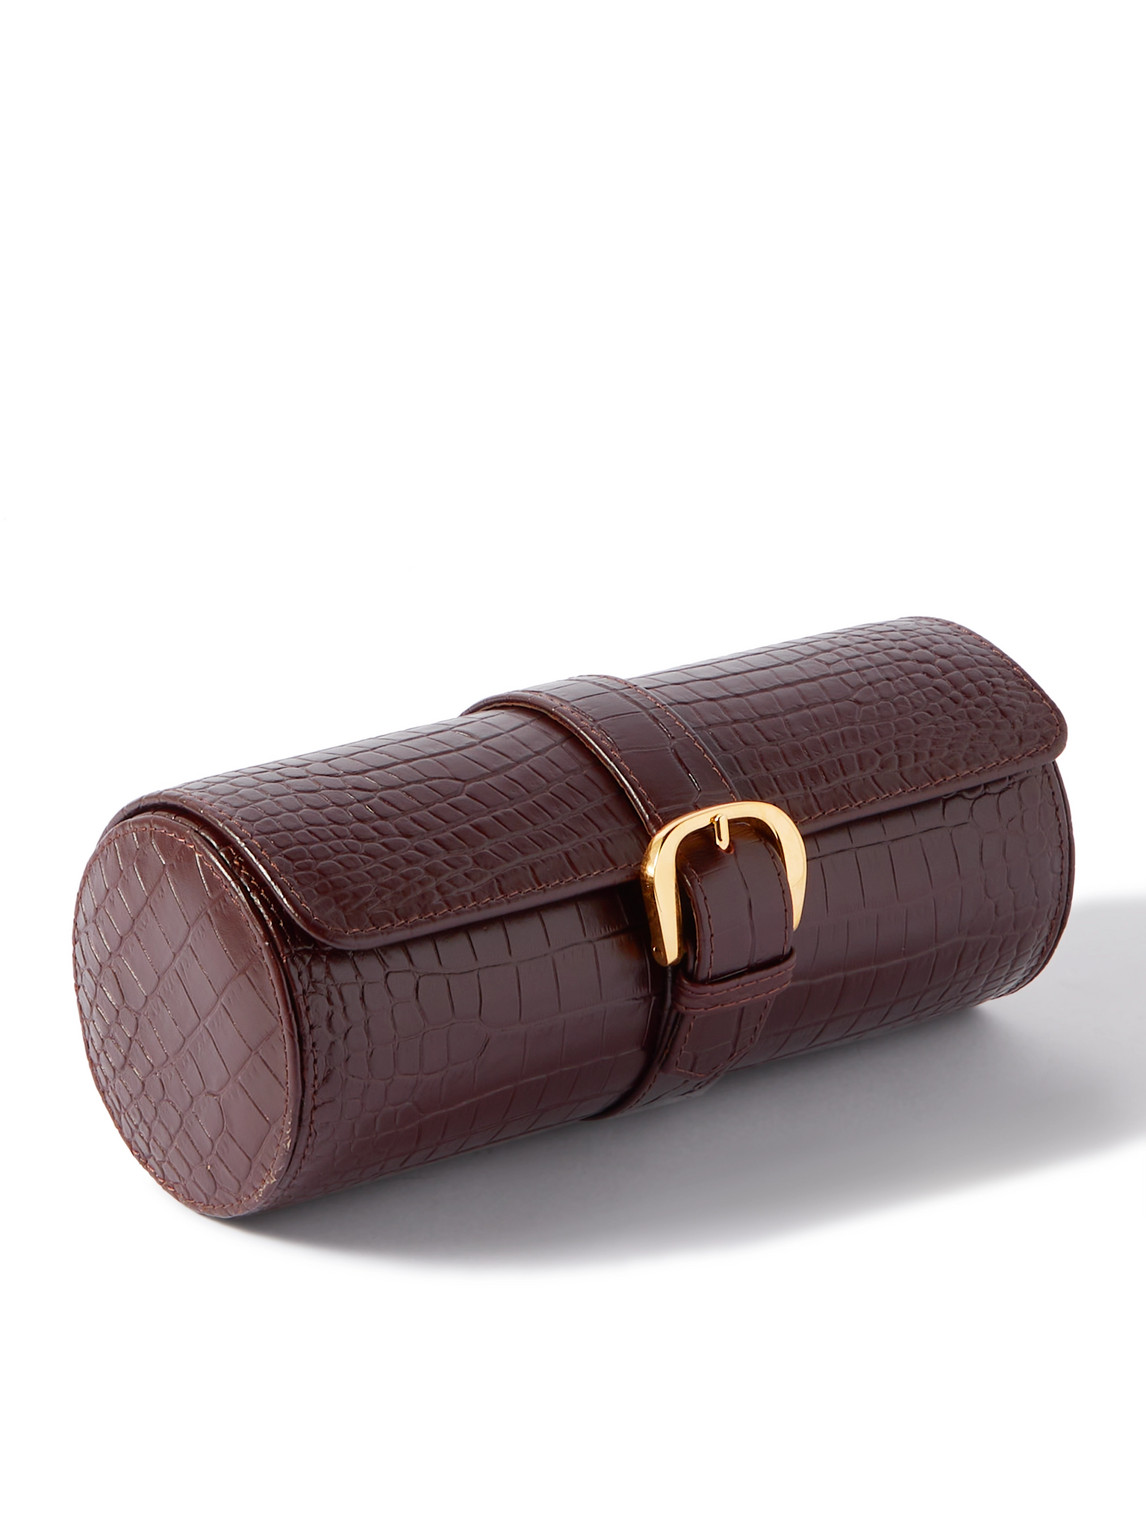 Rapport London Croc-effect Leather Watch Roll In Brown